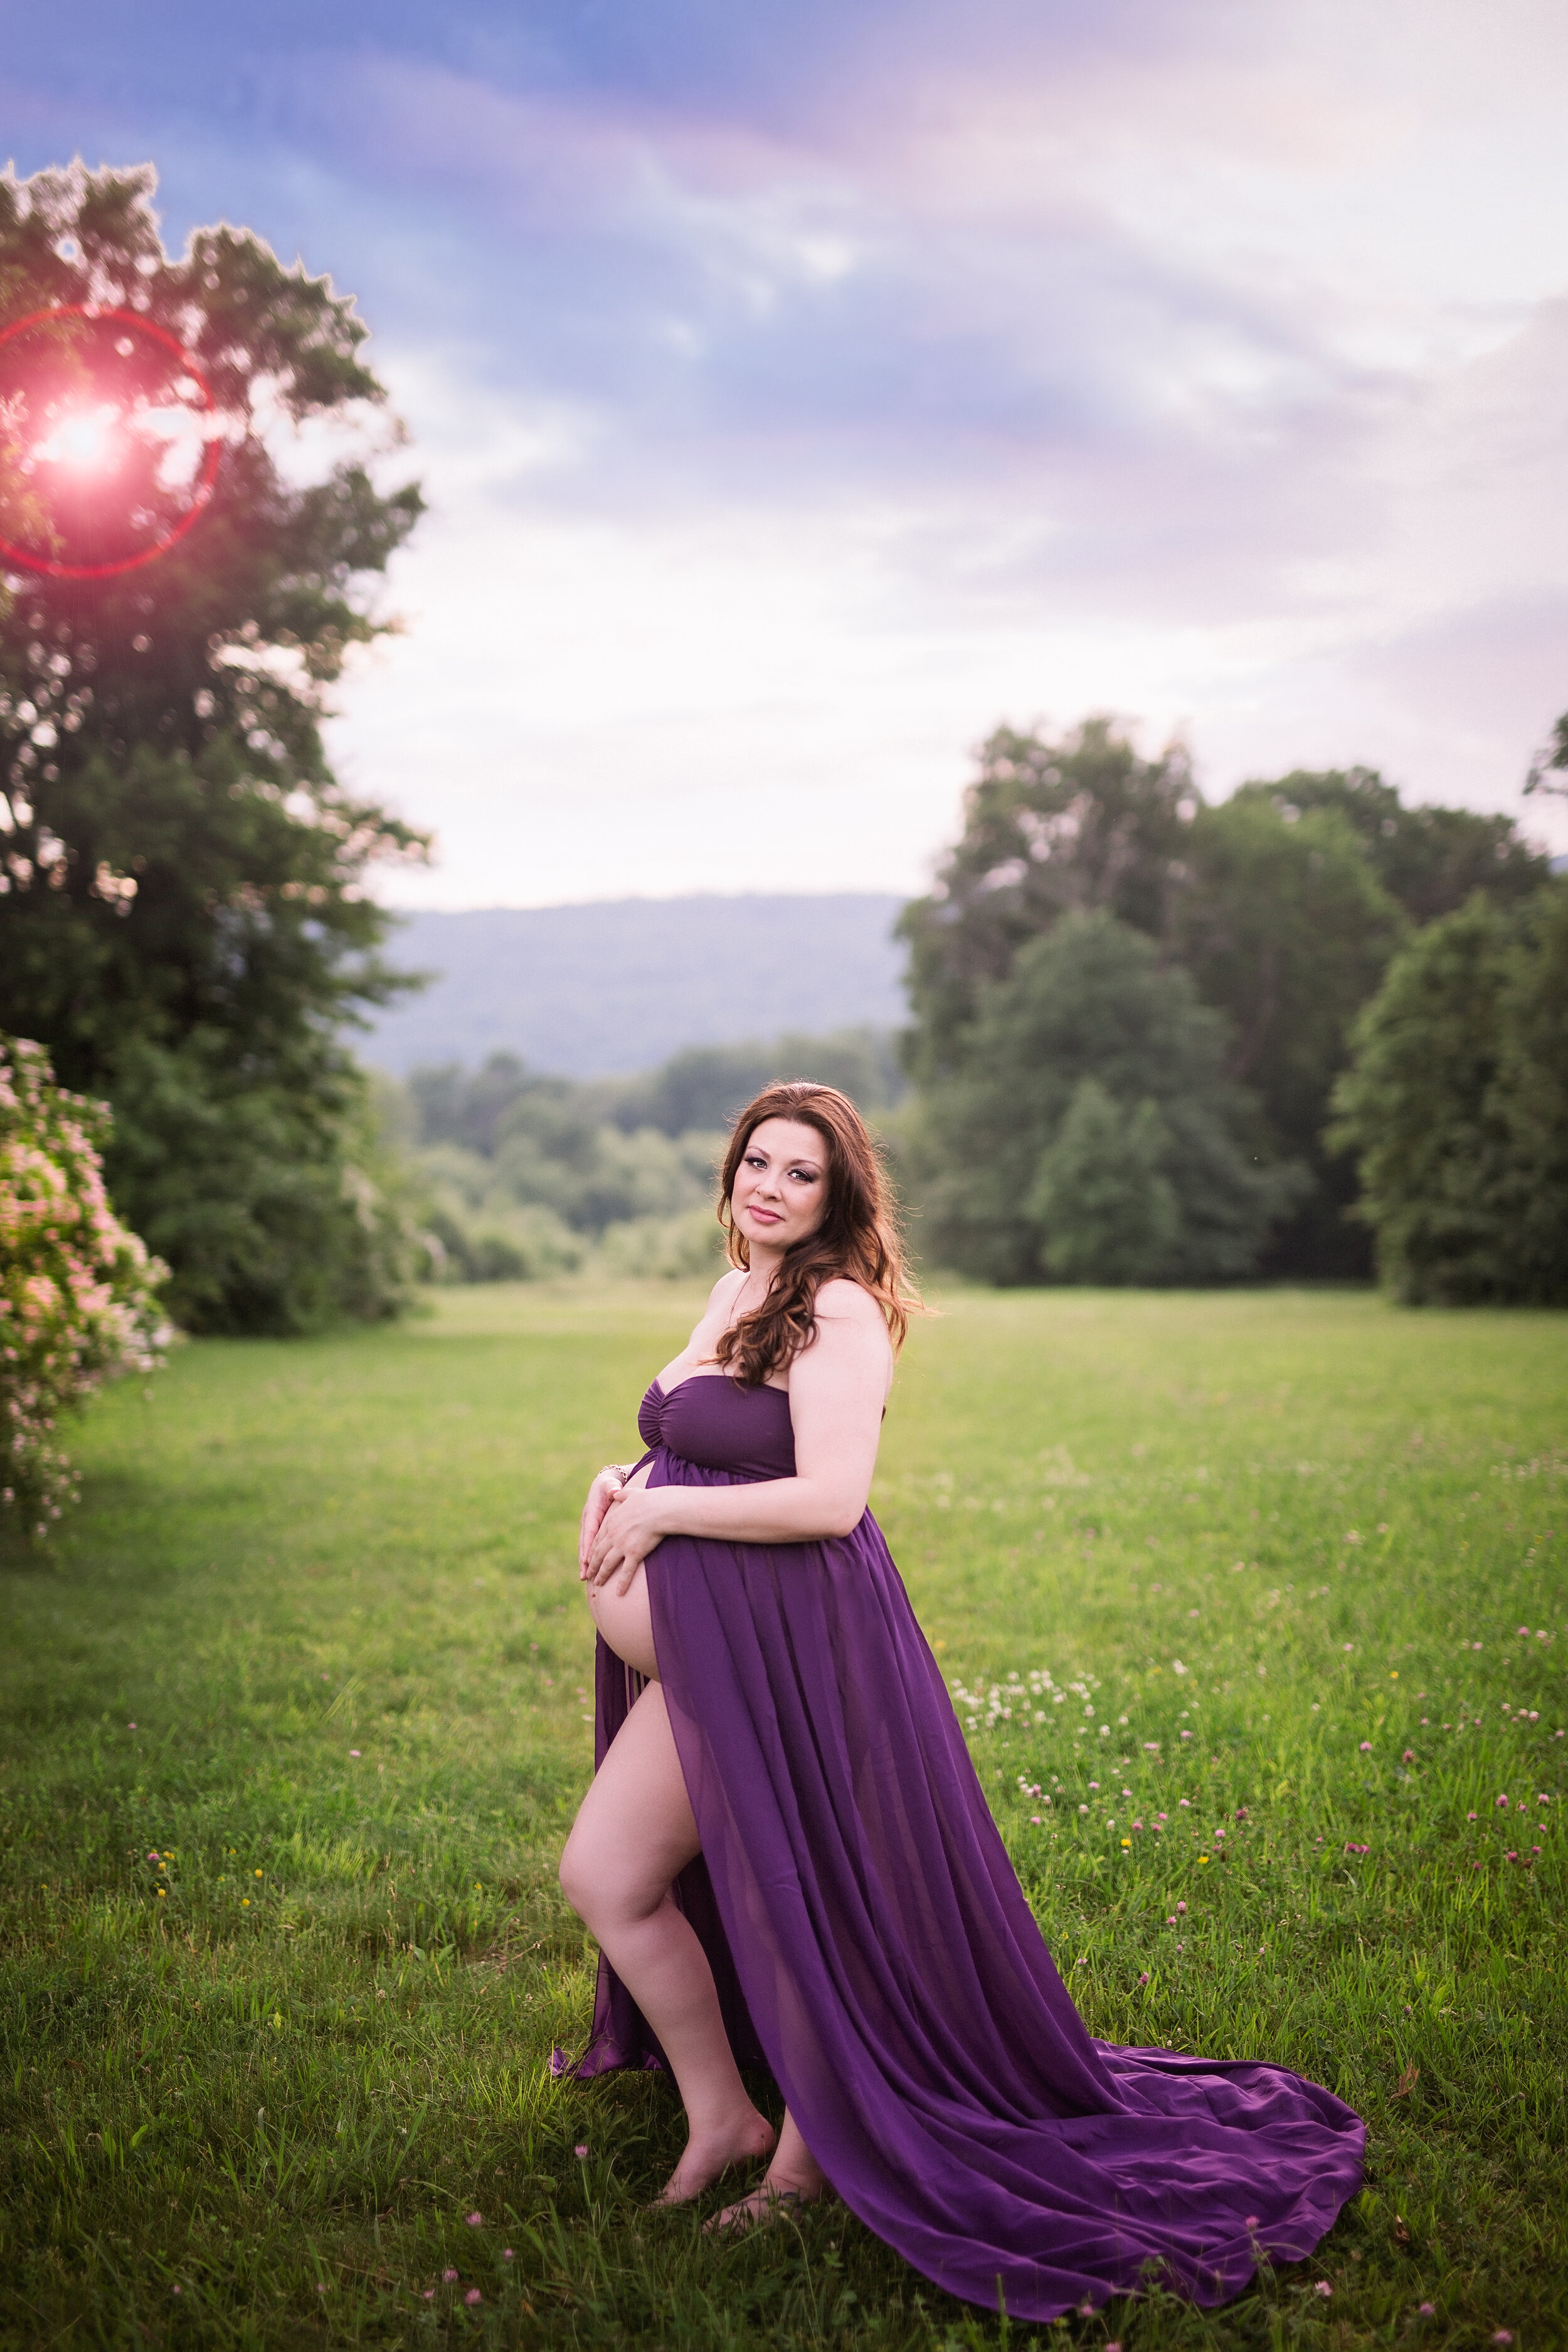  Woman standing in open field with trees and fields behind her as she poses in a flowing purple maternity dress 